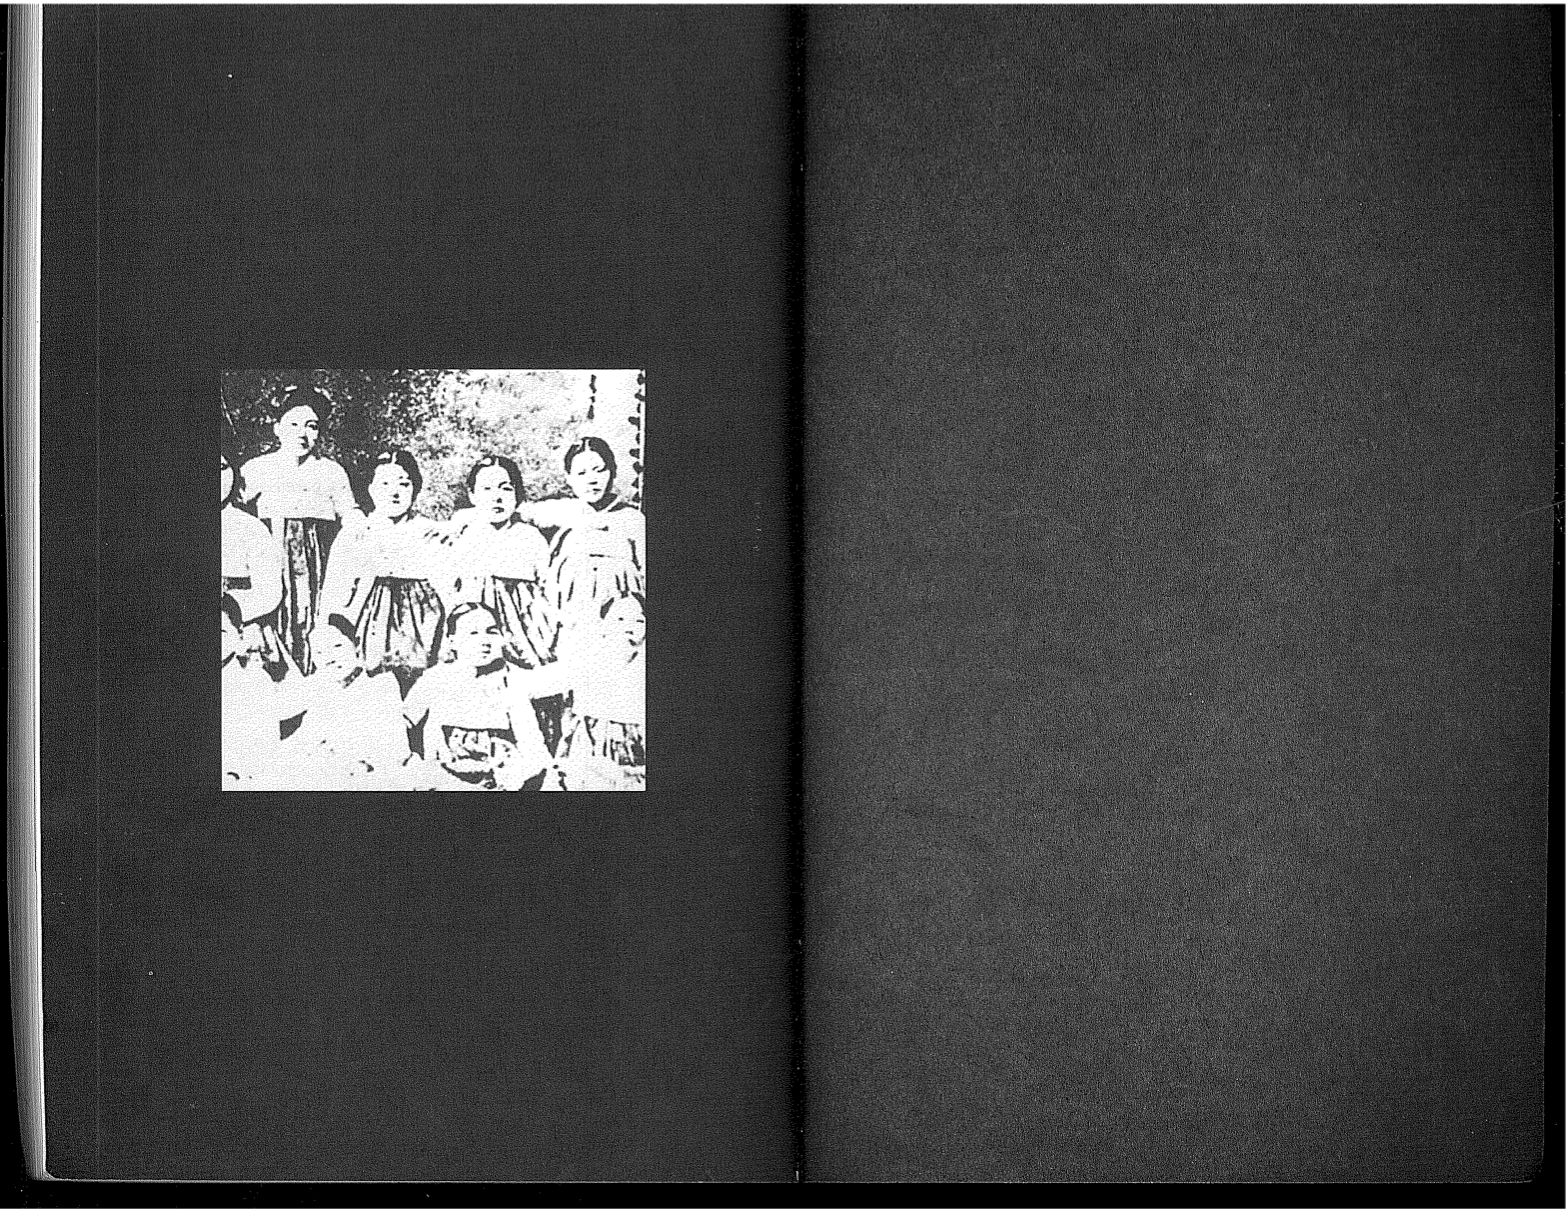 Page layout from Theresa Hak Kyung's Dictee. Both pages are black. On the left side of the page, there is a black and white image of a group of individuals in traditional Korean dress.